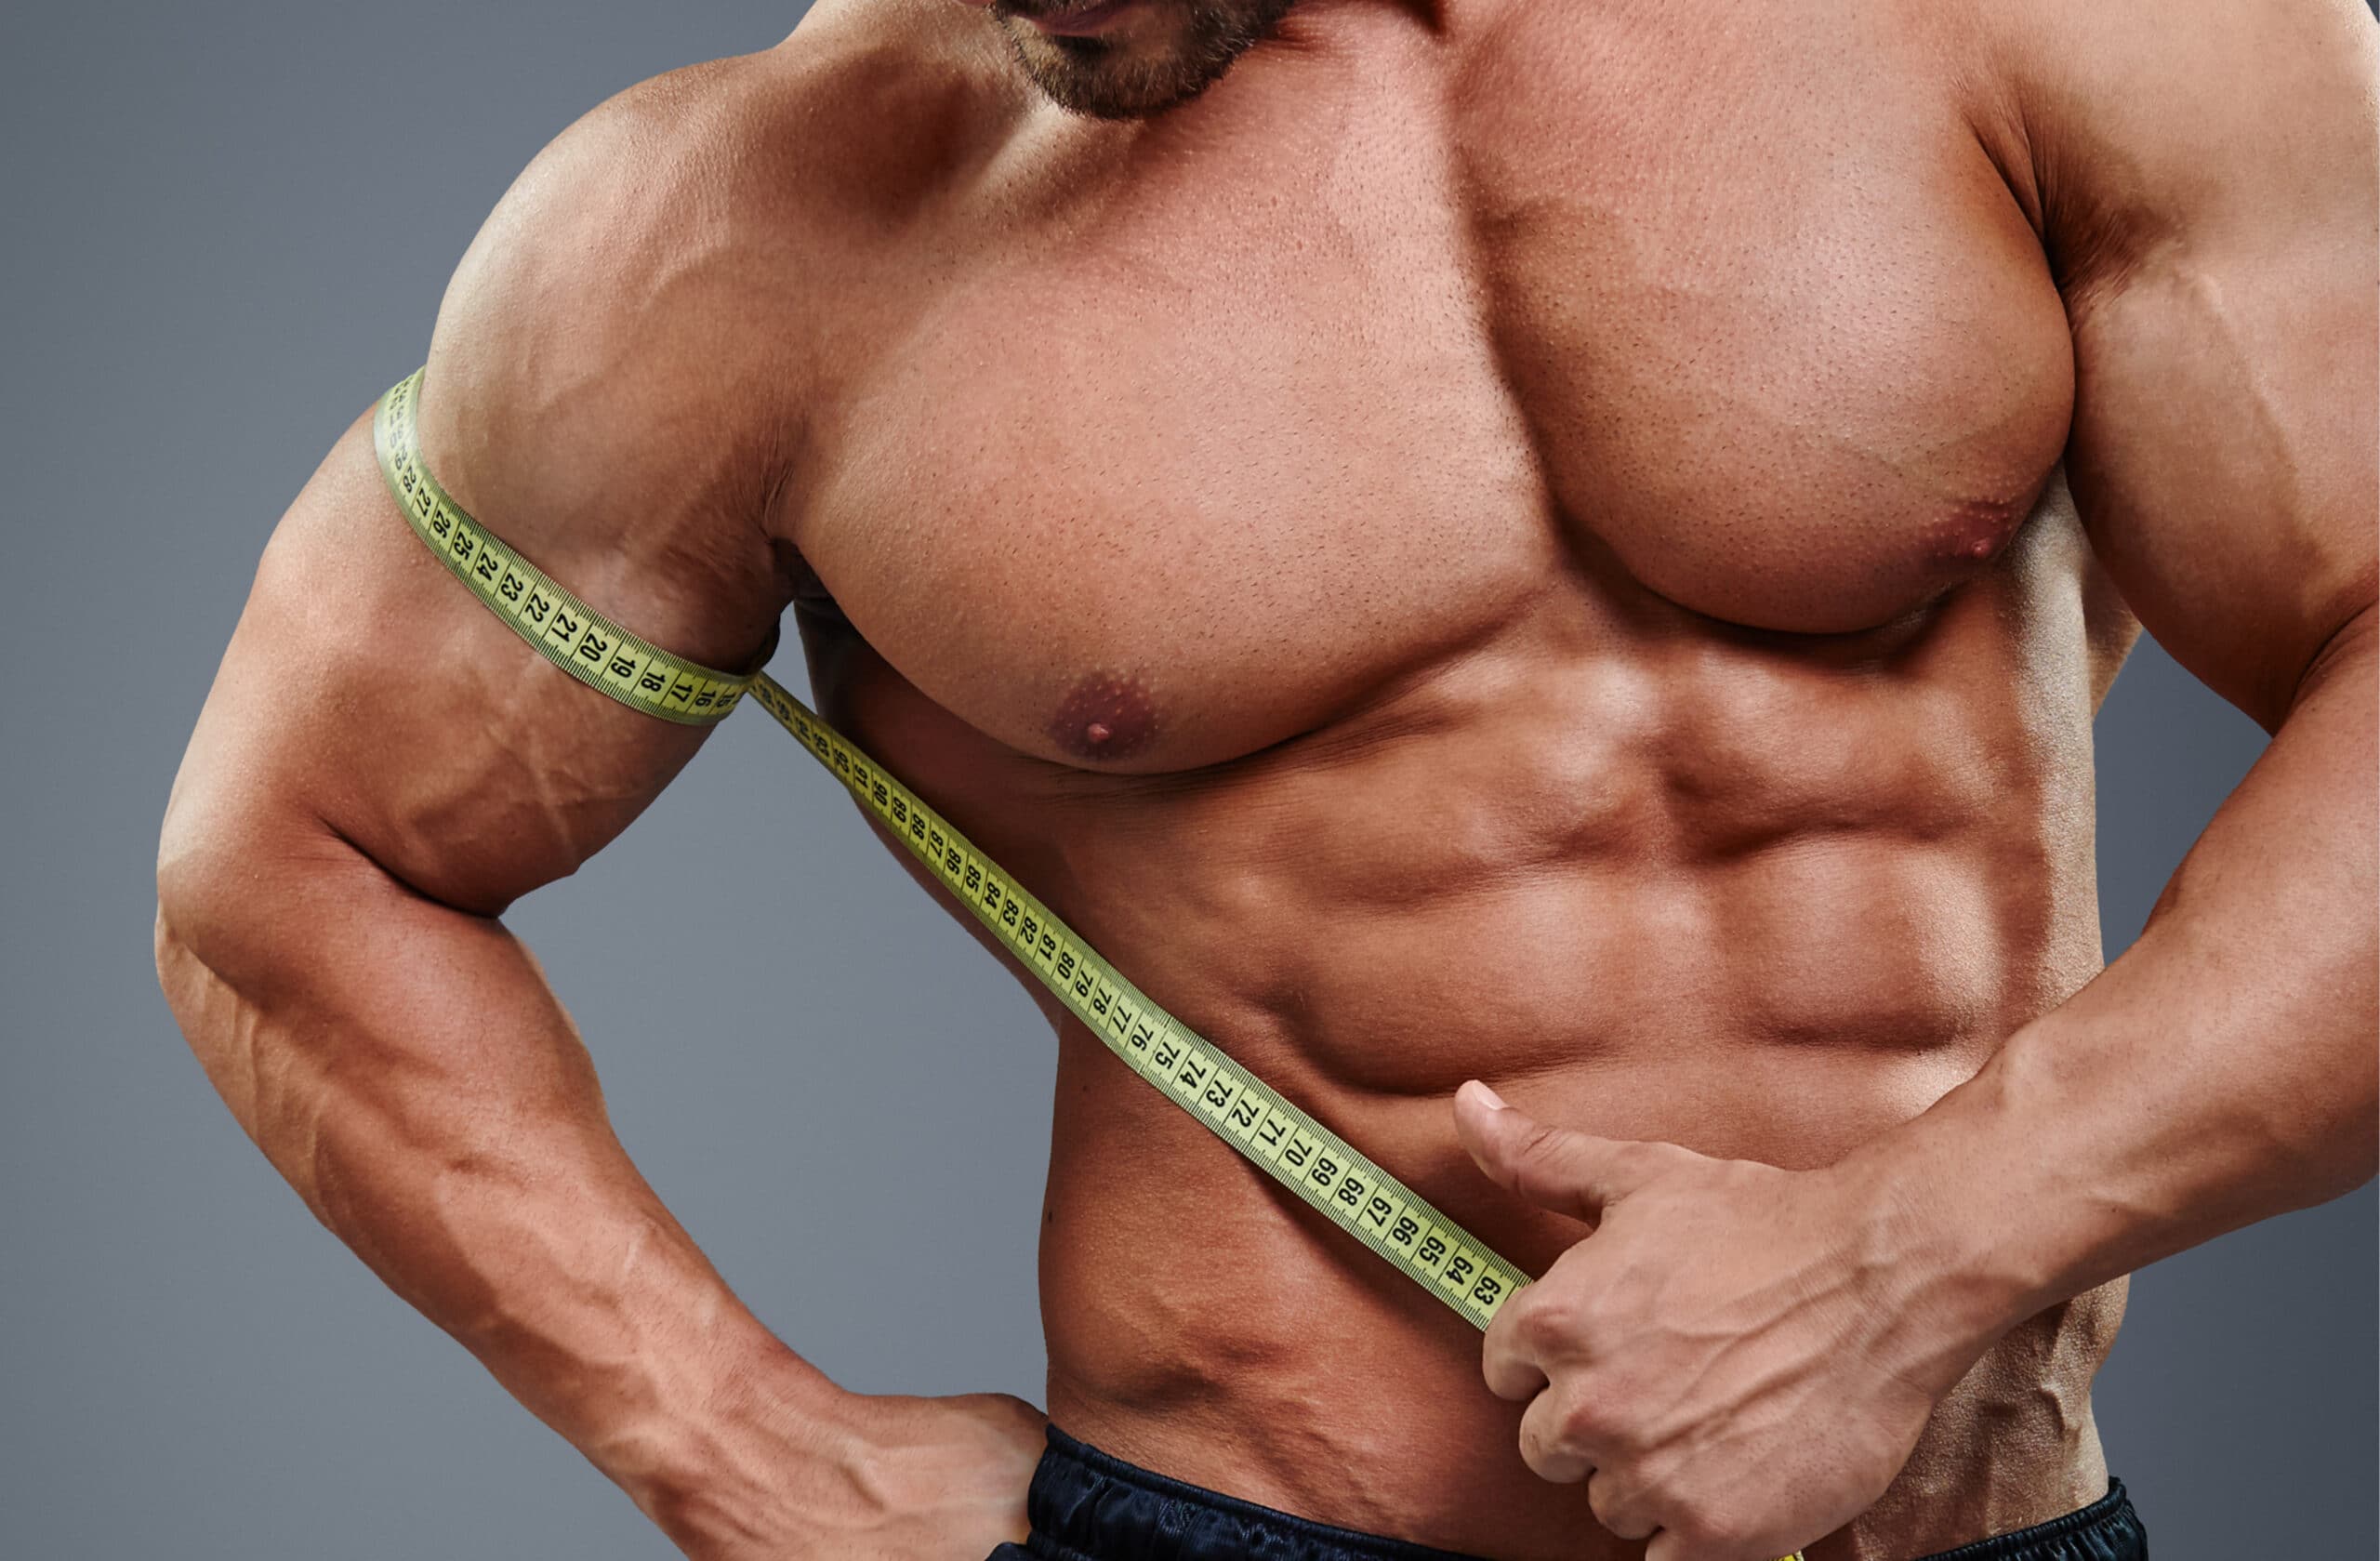 Are 14 Inch Arms Big, Small, or Average? See If They Measure Up